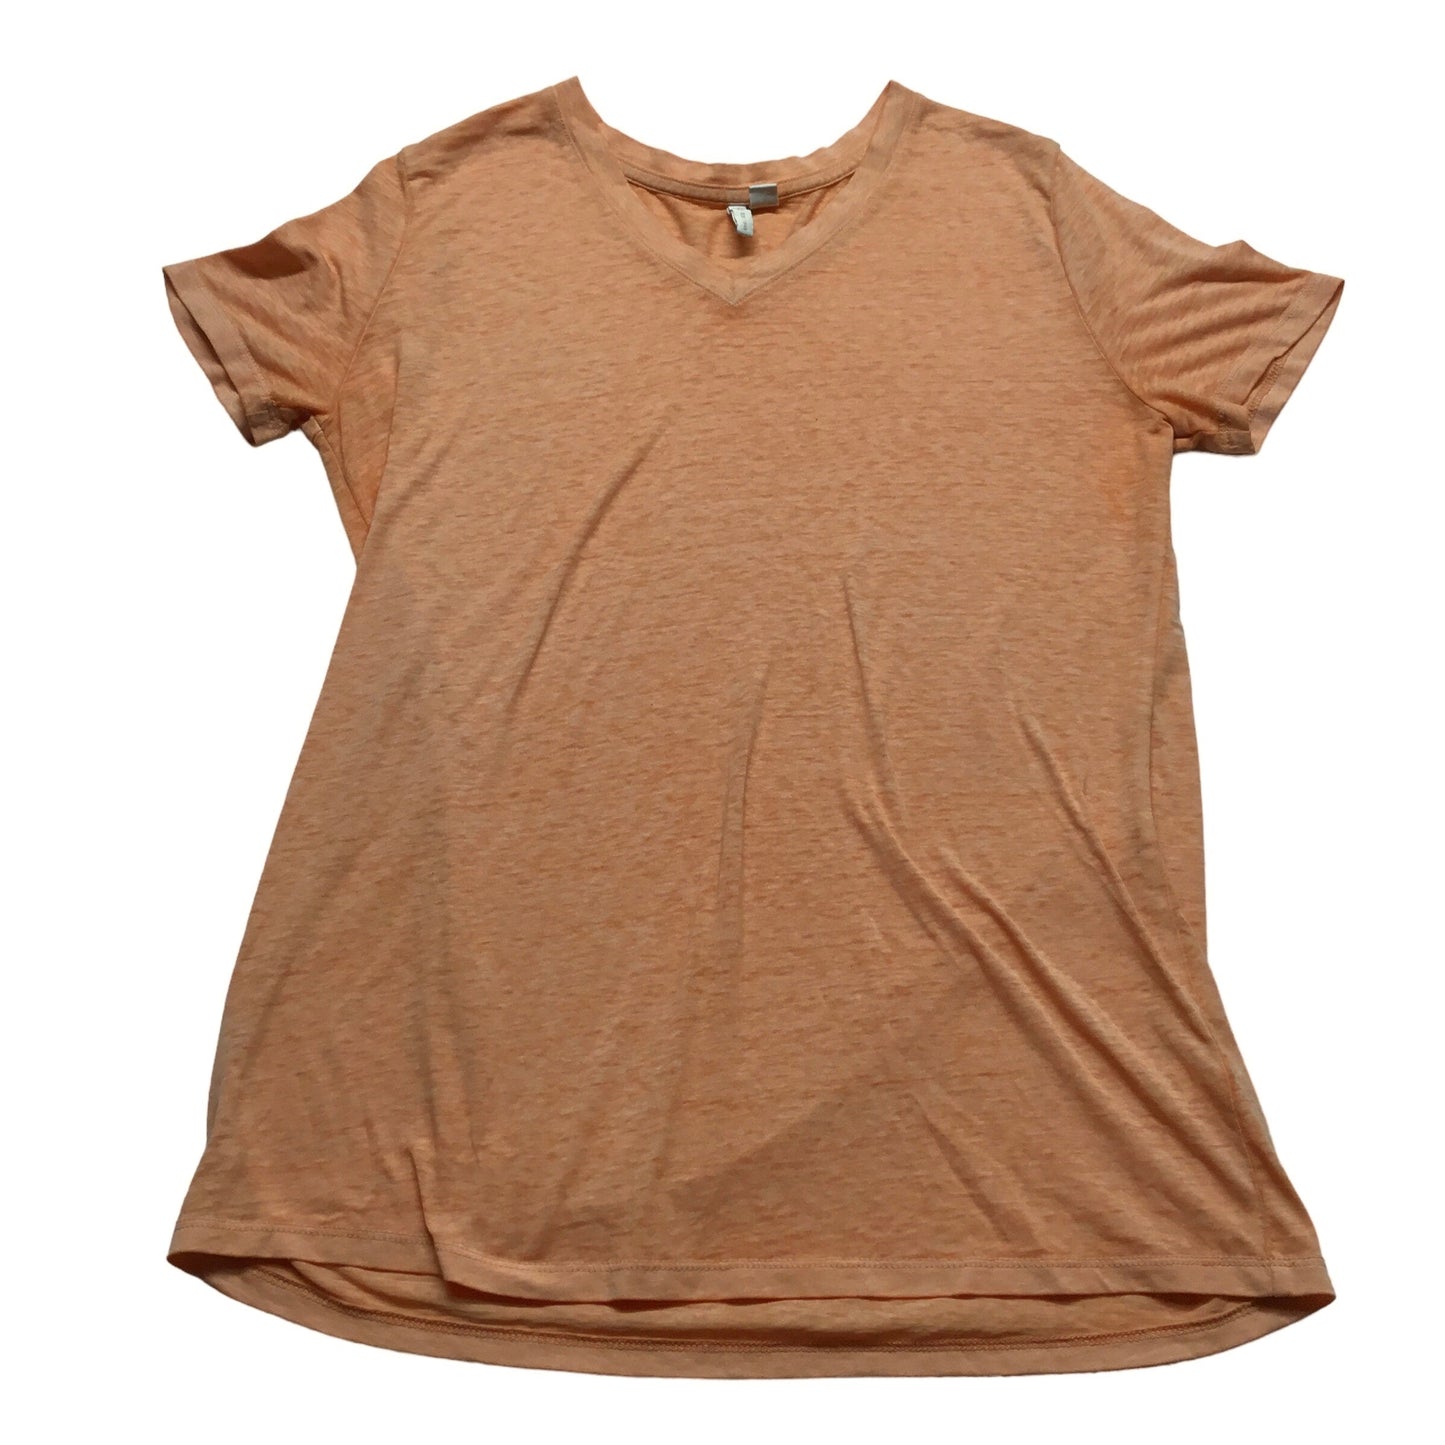 Peach Top Short Sleeve Cato, Size M